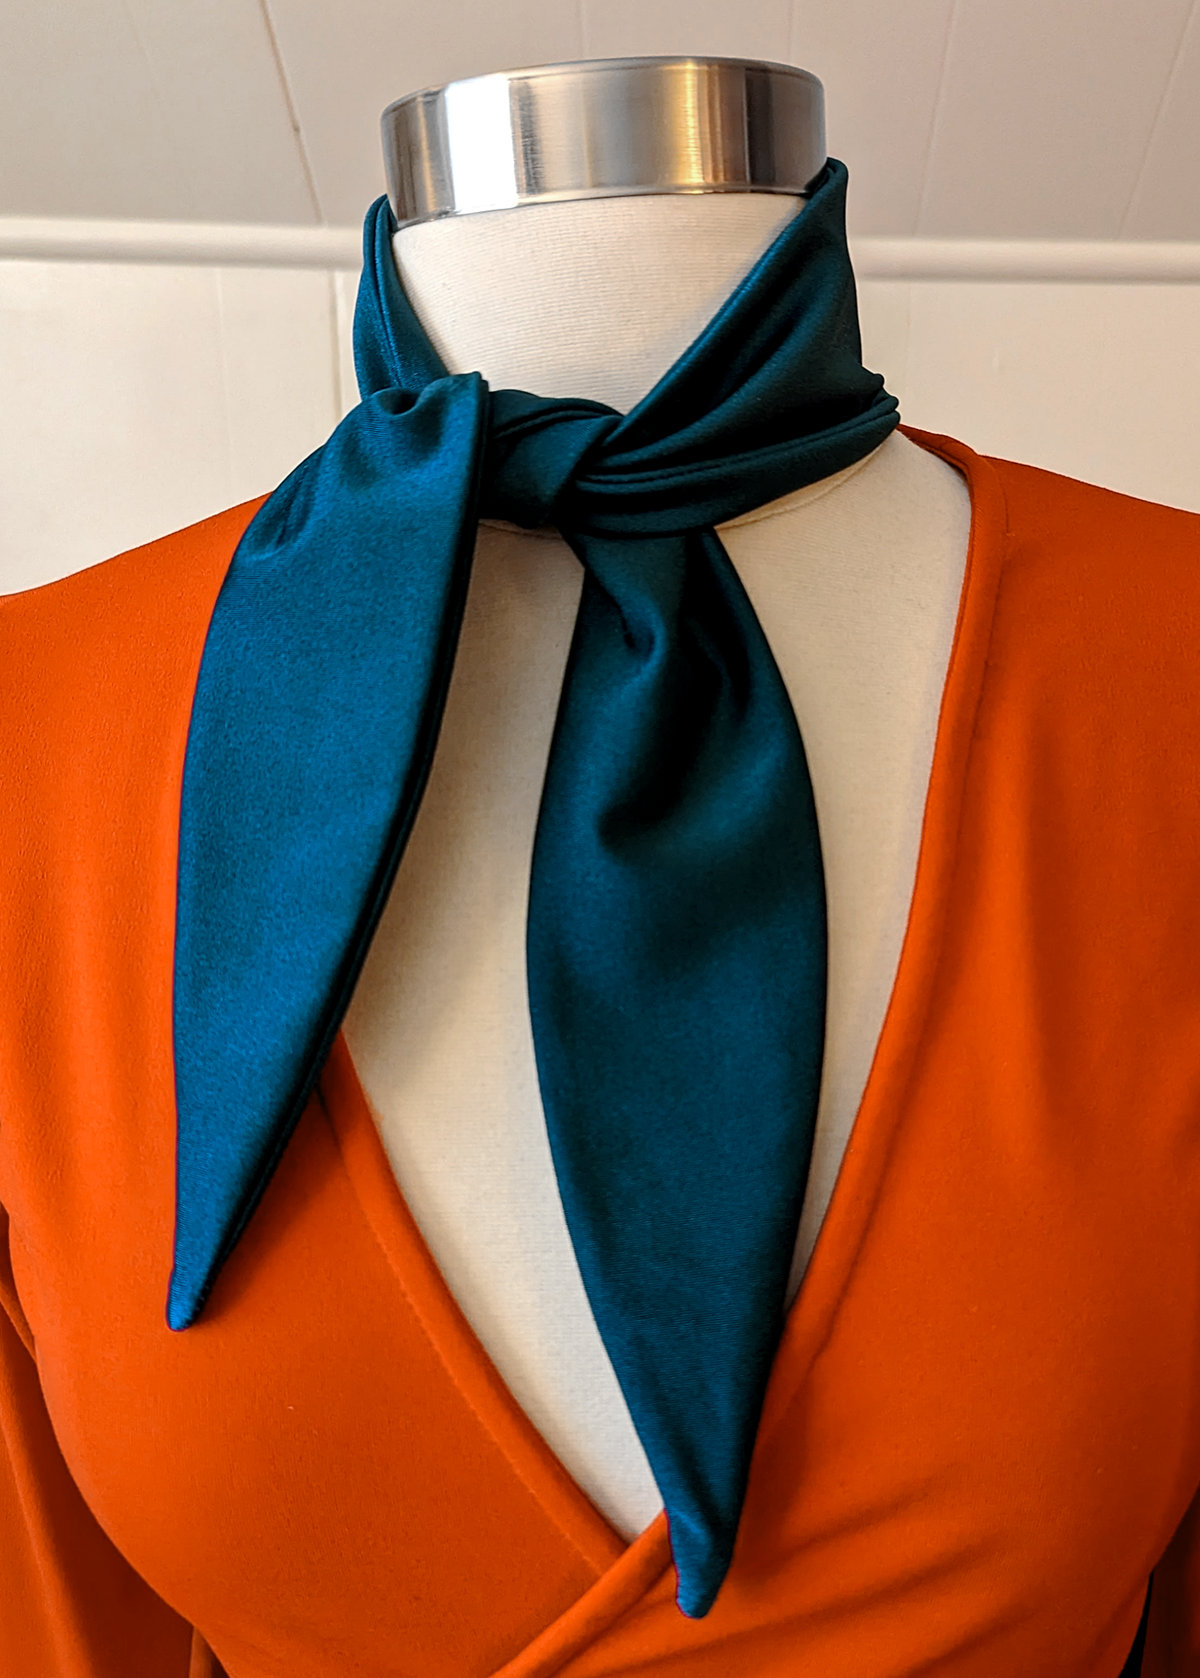 70s inspired shimmer blue bayou scarf neck tie by I'm WIth the Band Headbands made in California